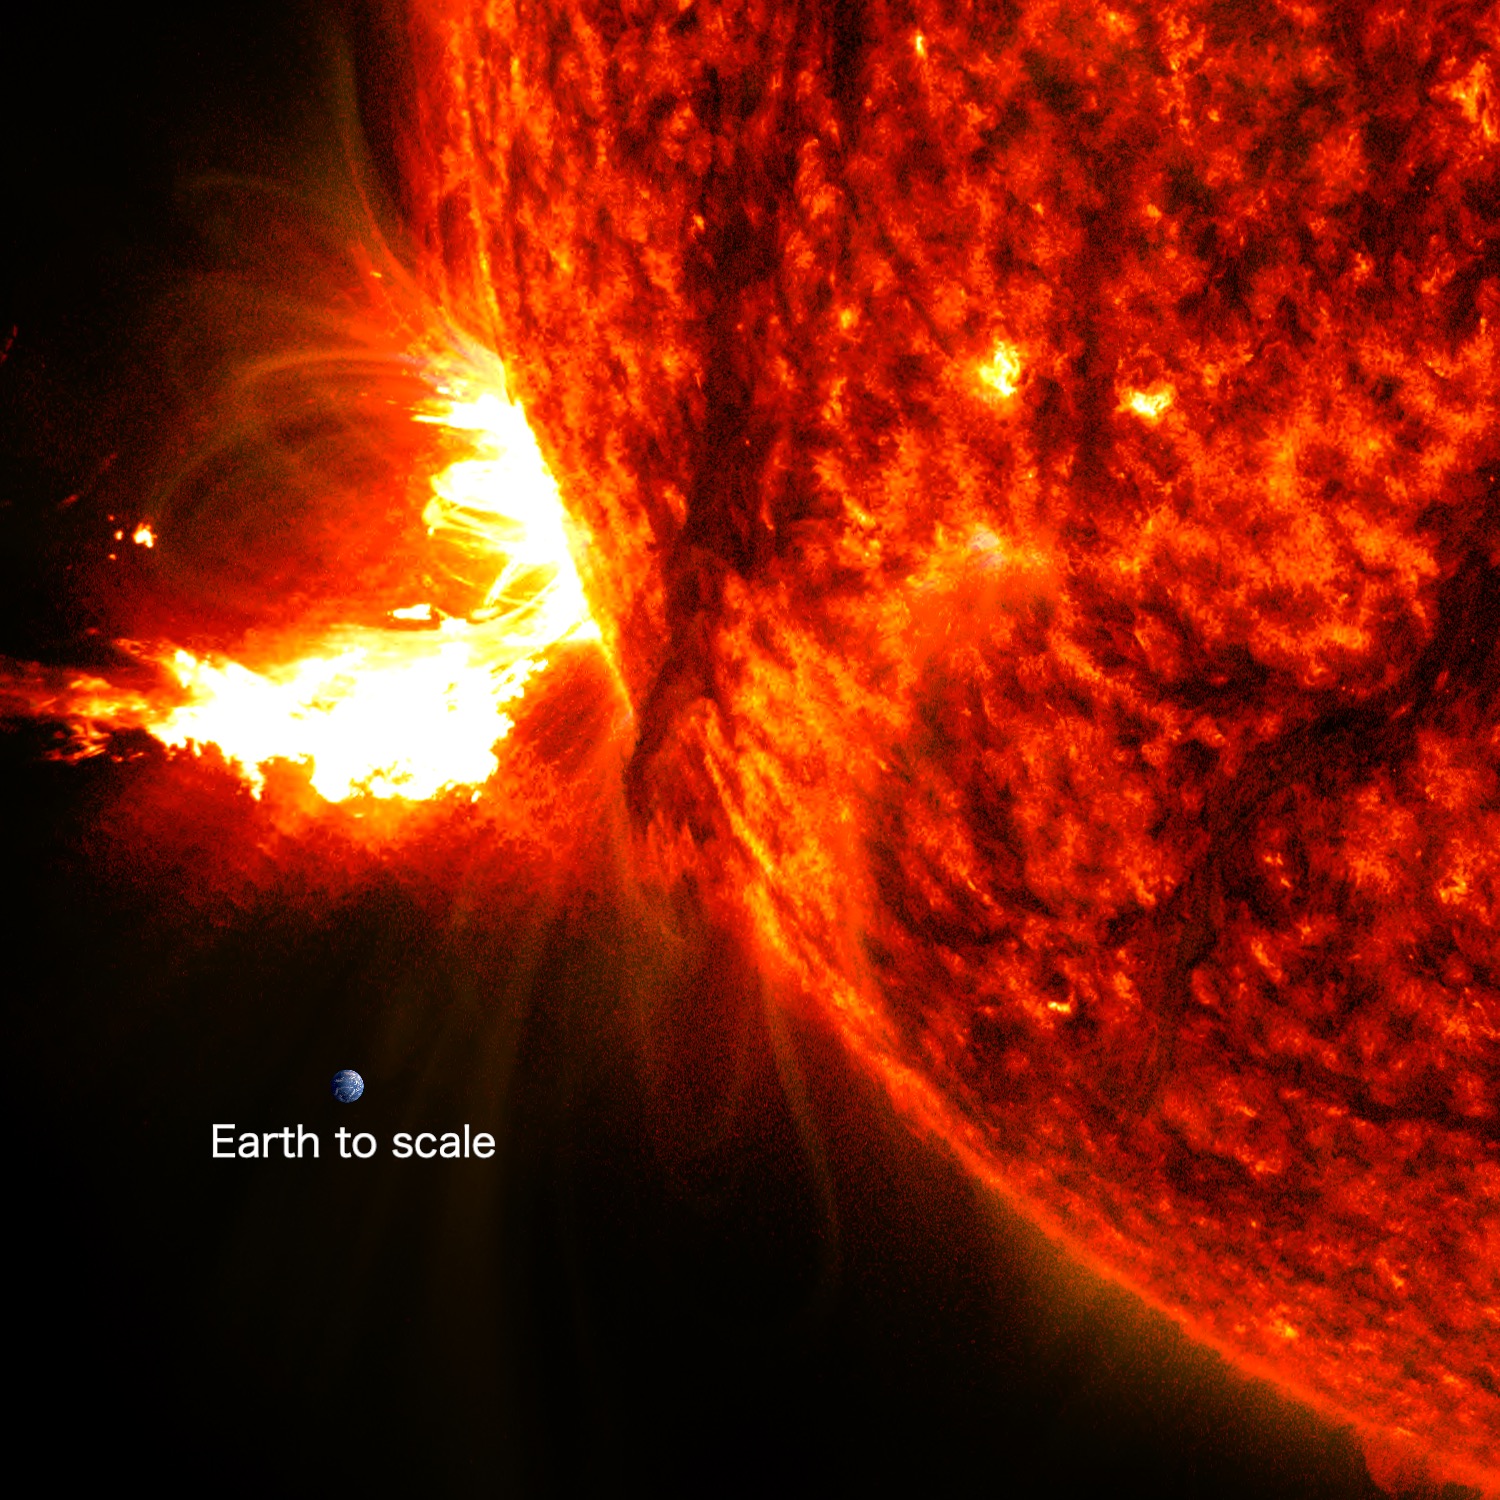 NASA’s Solar Dynamics Observatory captured this image of a solar flare seen as the bright flash on the limb of the Sun on May 27, 2024, with an inset image of Earth for scale. The image shows a blend of 171 and 304 angstrom extreme ultraviolet light that highlights the extremely hot material in flares and which is colorized in red and yellow. Credit: NASA/SDO